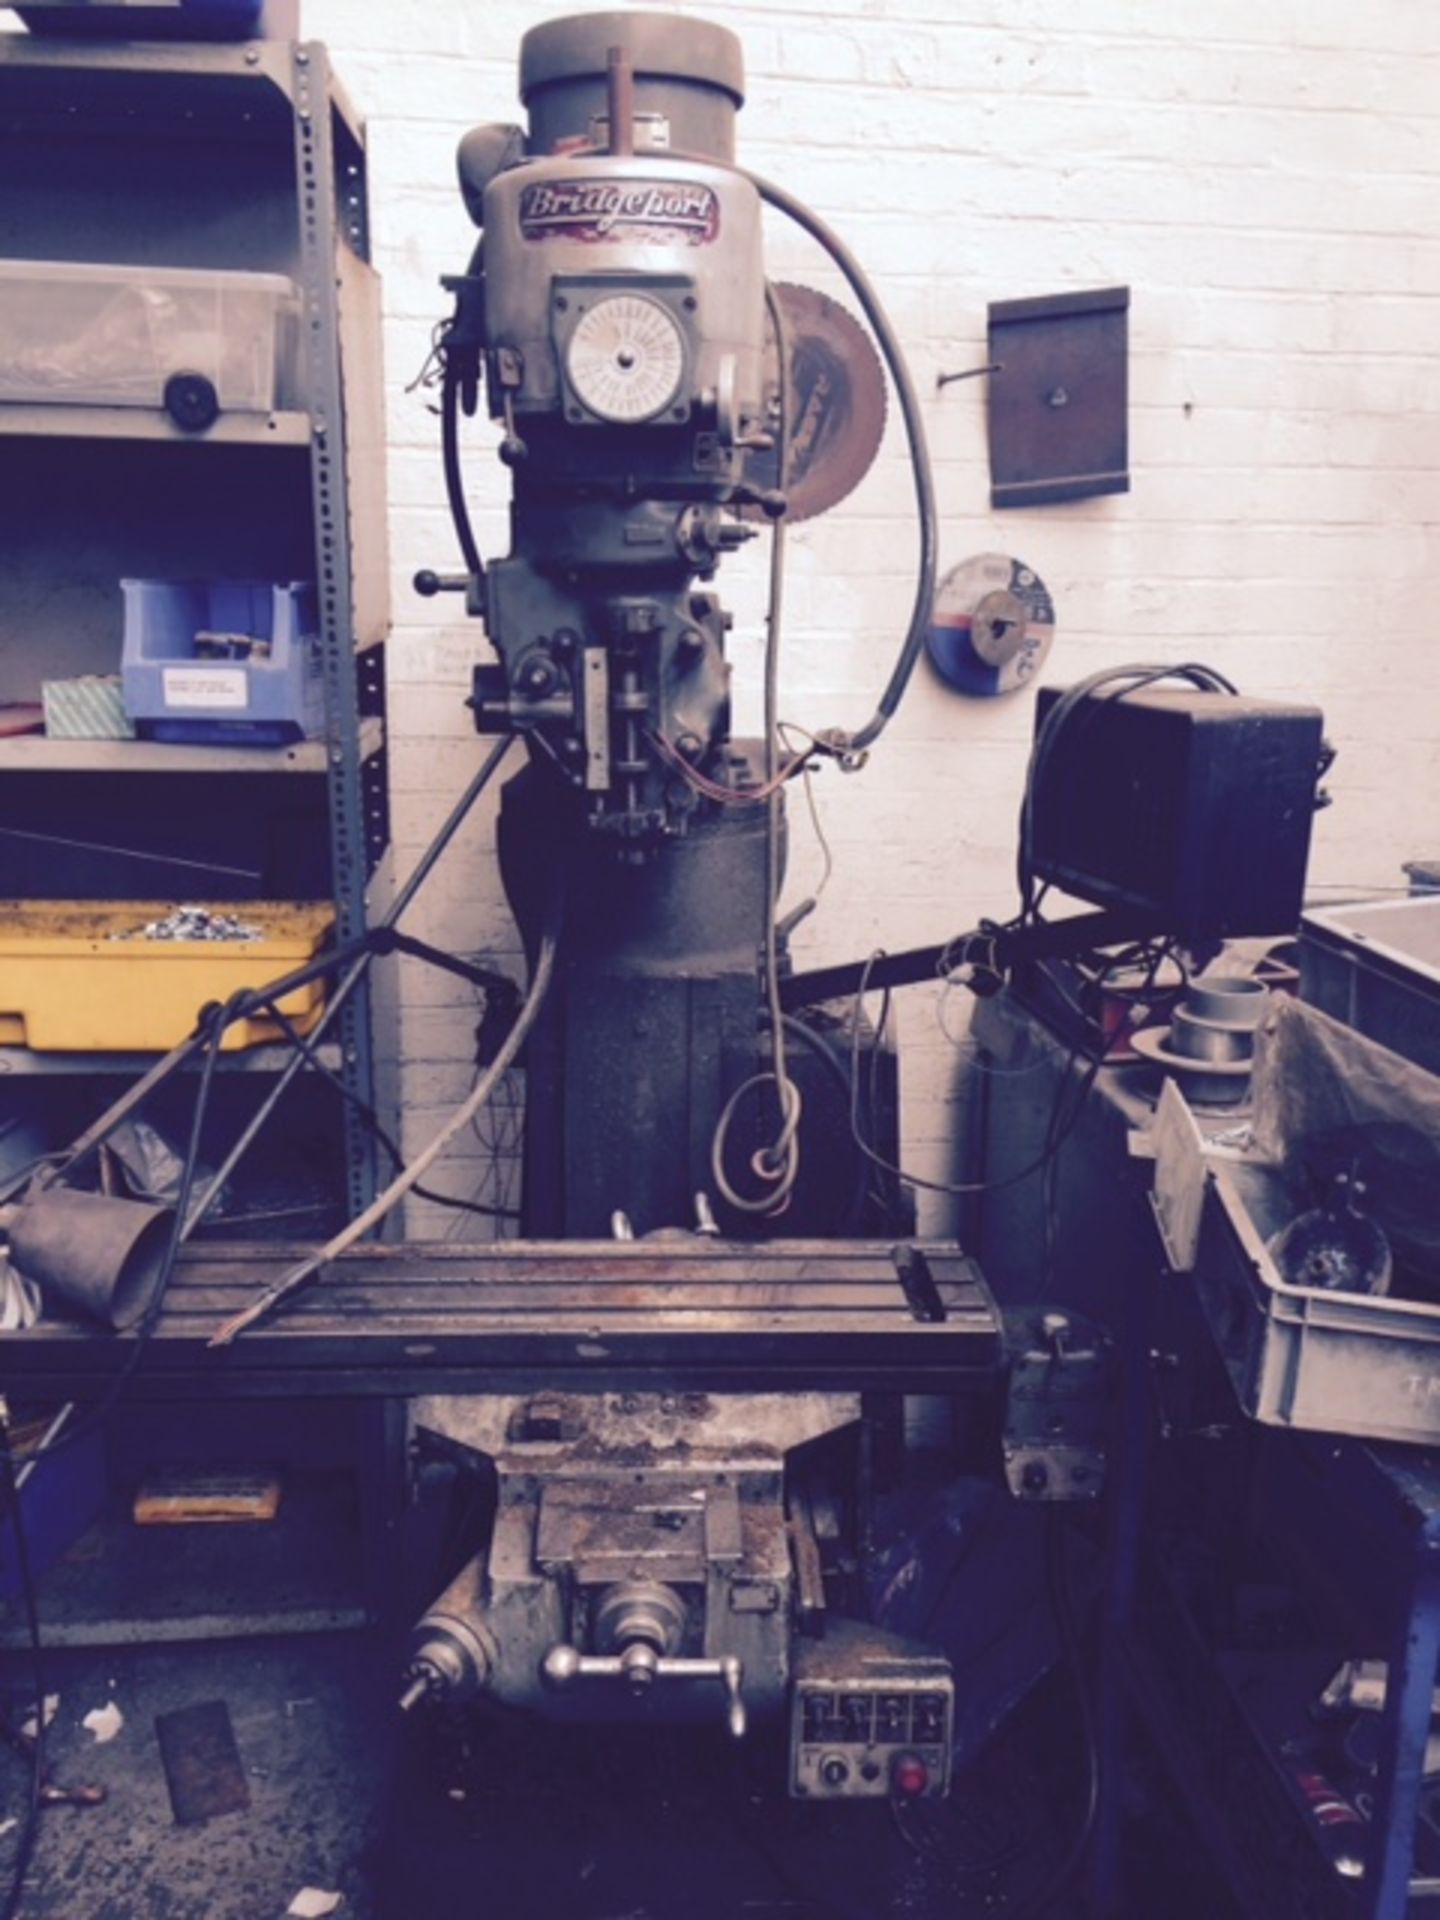 Bridgeport Milling machine – non working requires repair could be used for parts